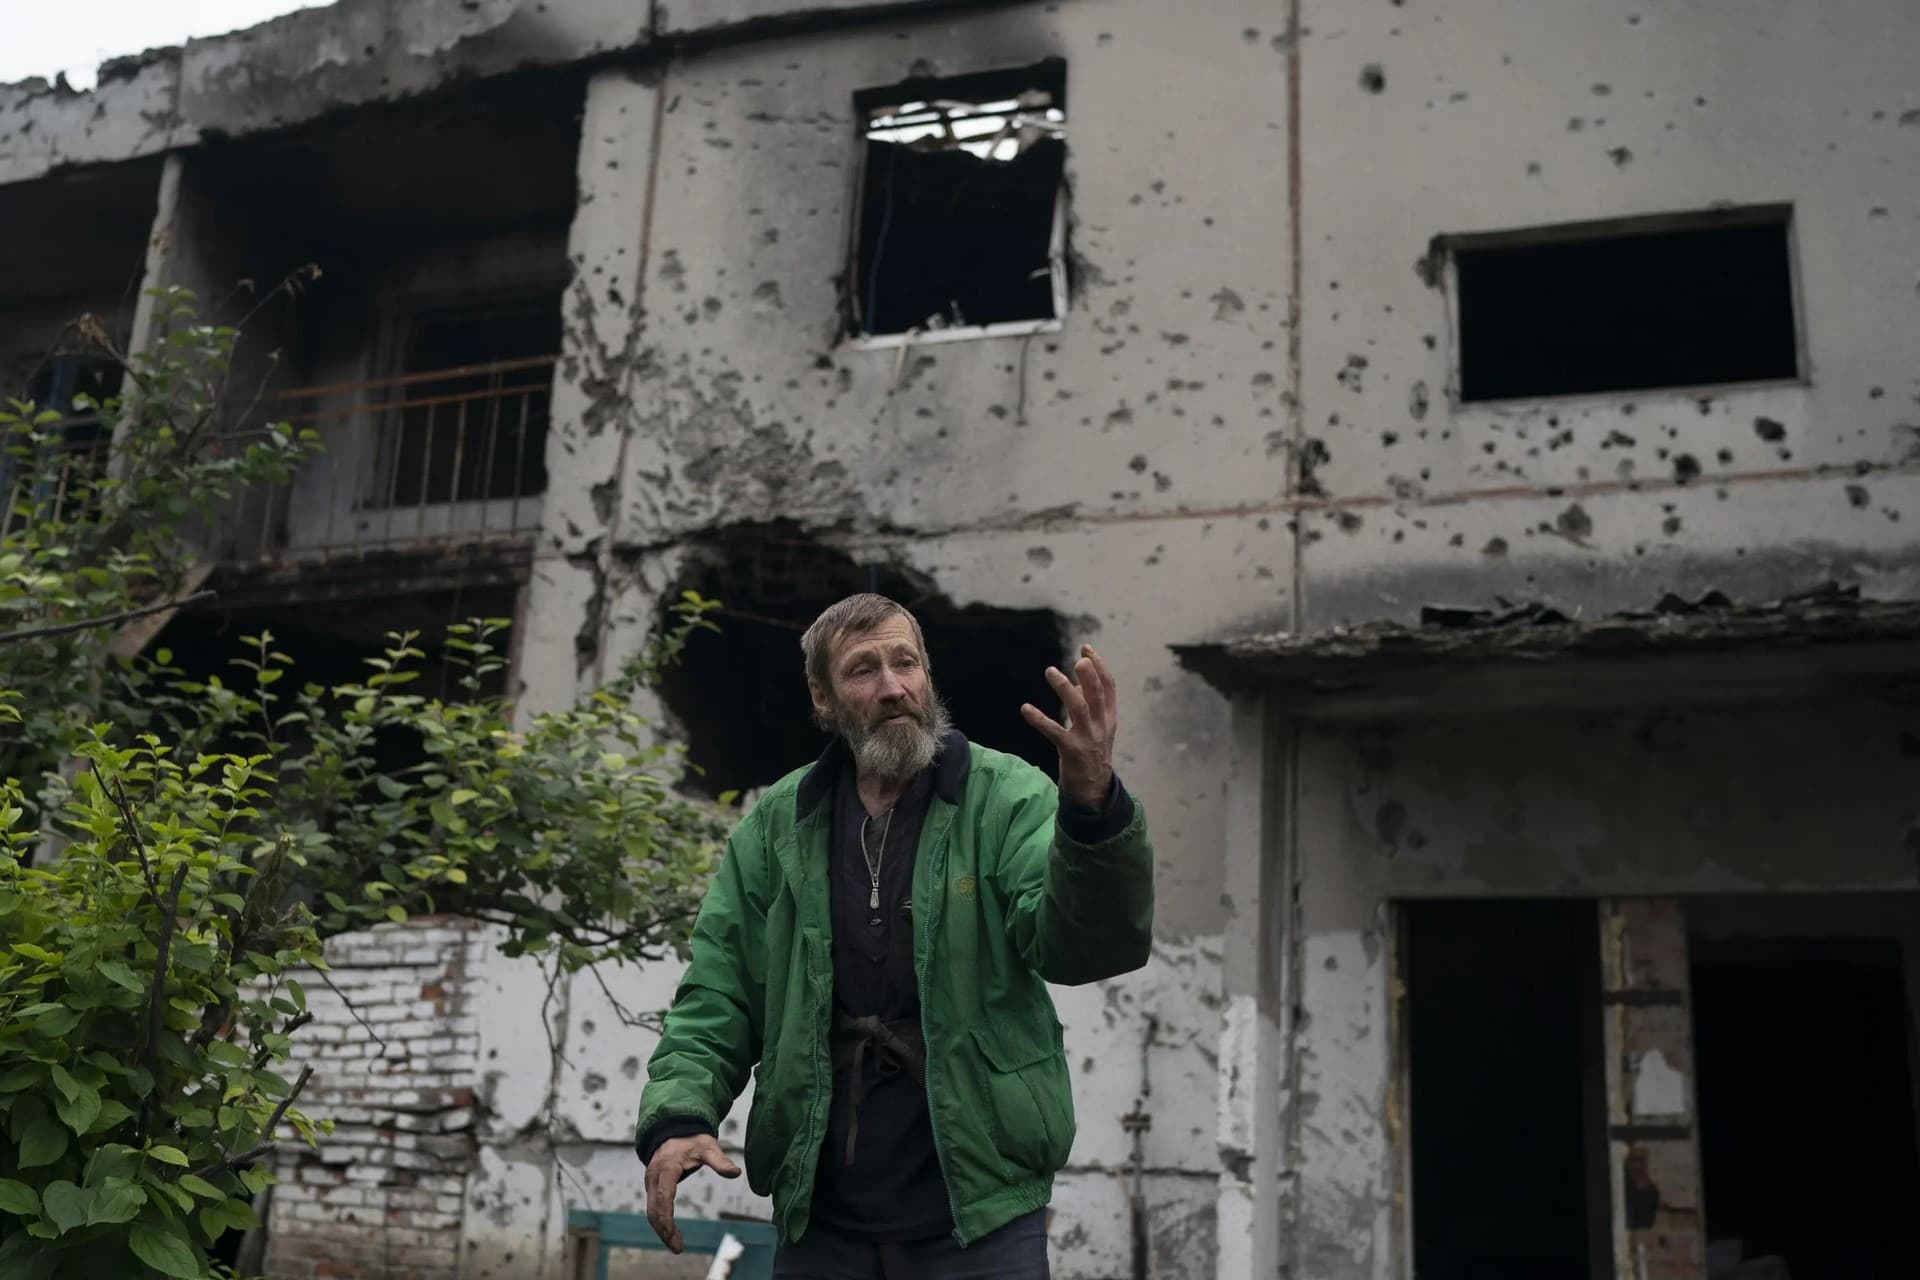 Viacheslav Myronenko stands in front of the entrance of a damaged building where he lives in the freed village of Hrakove